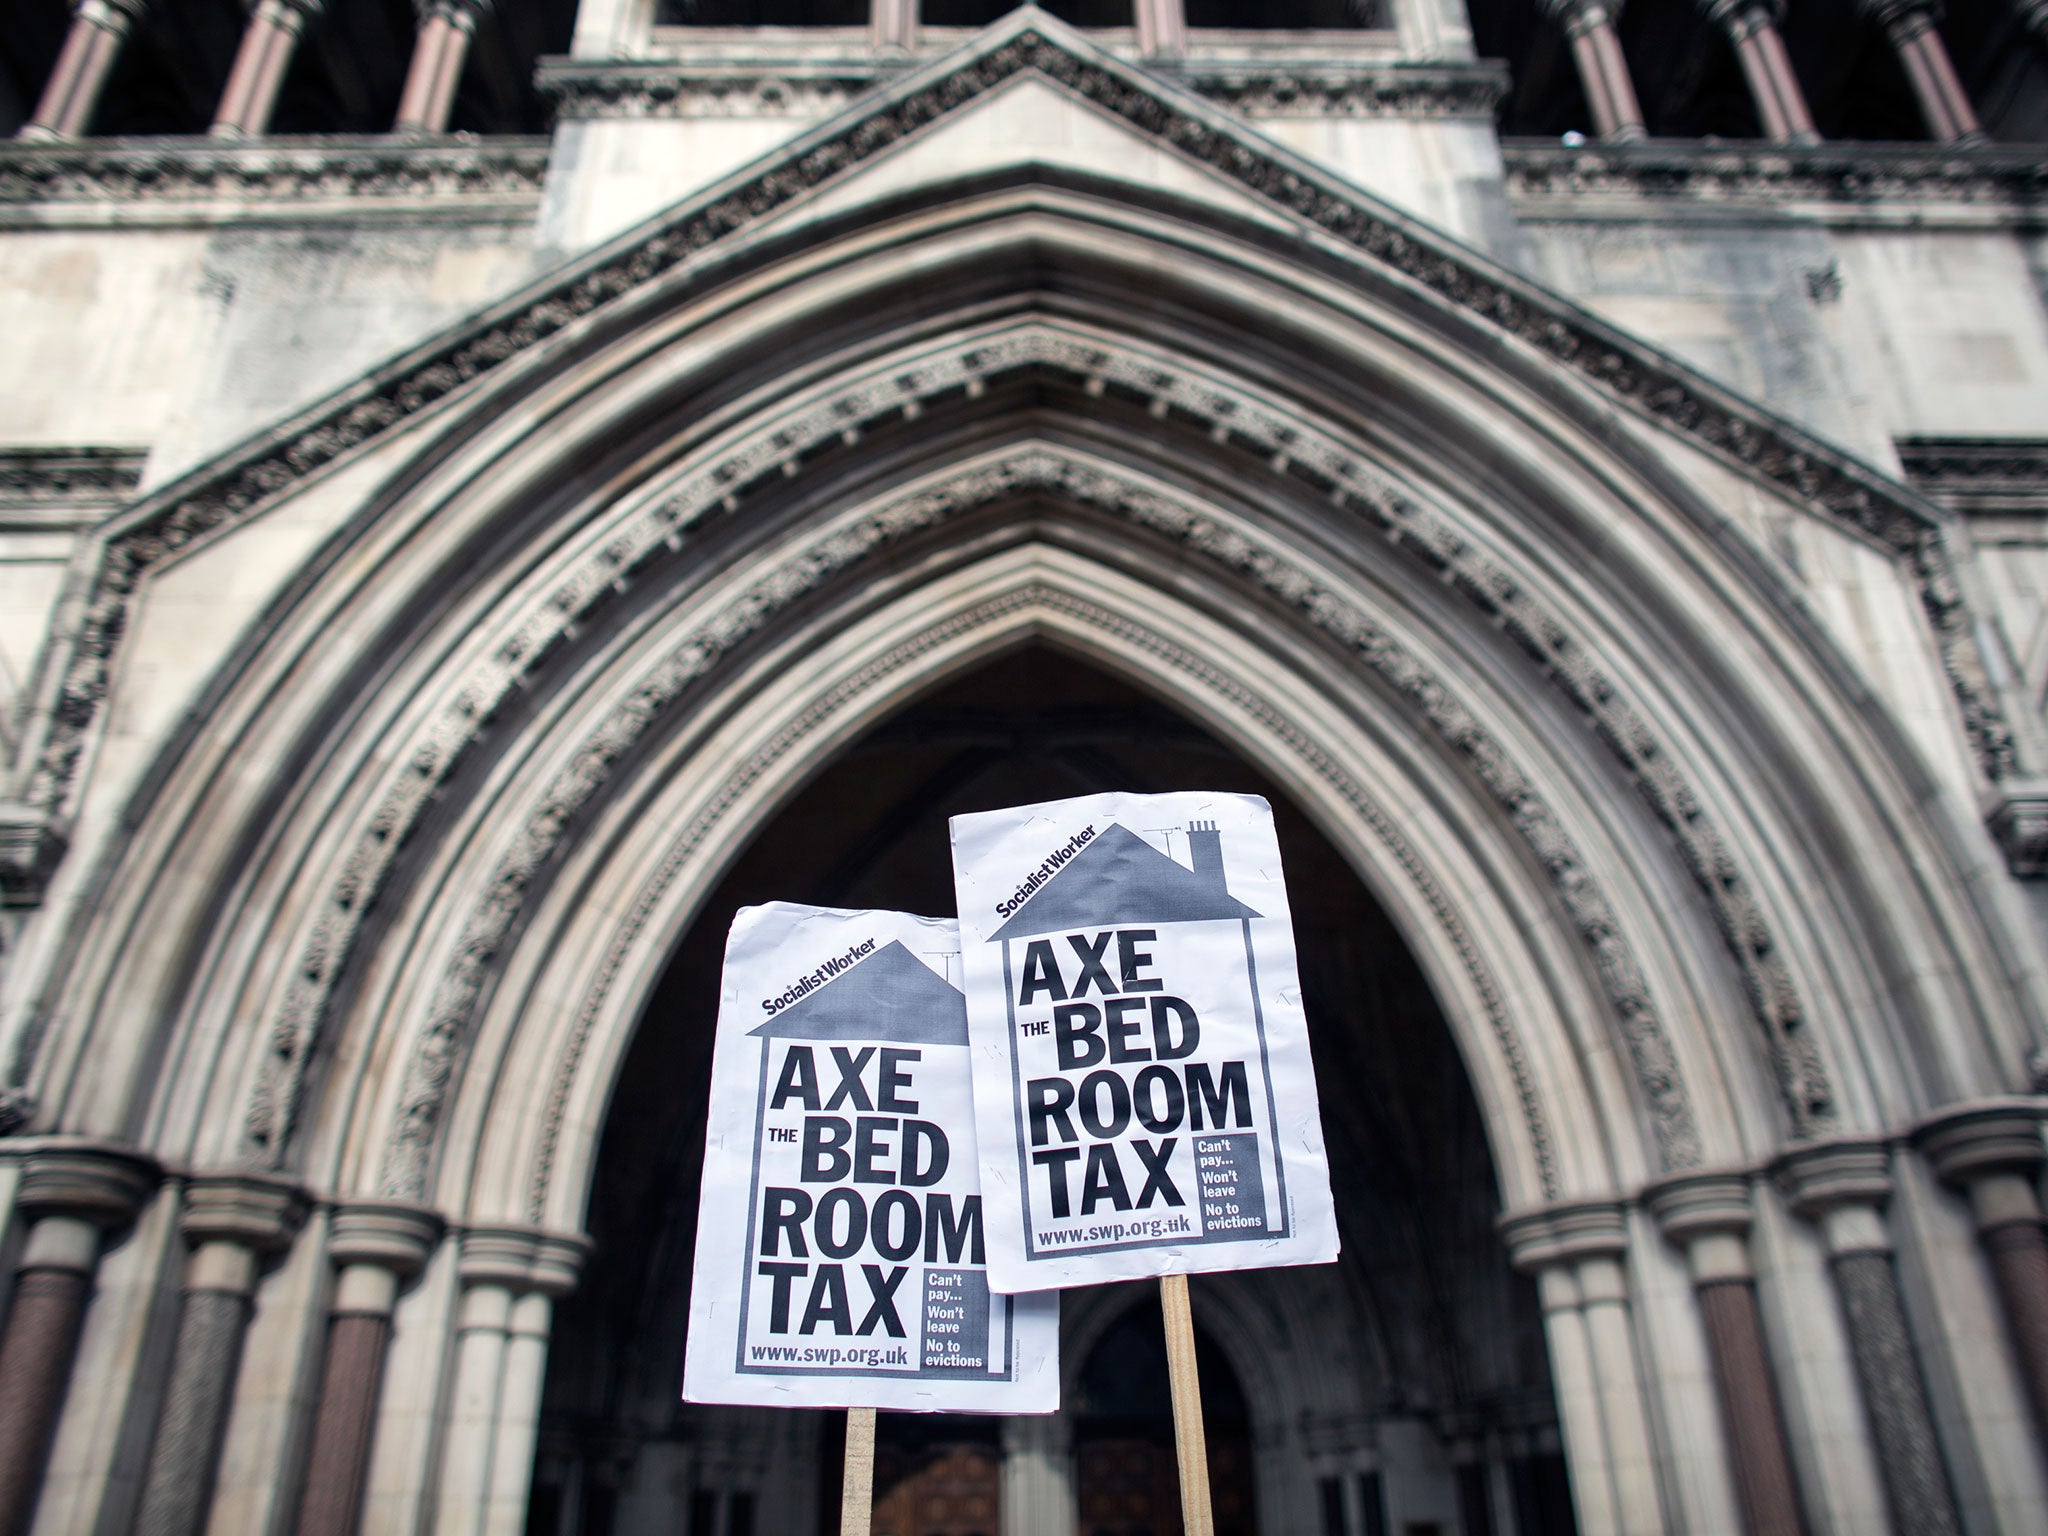 Church of England leaders will attack the Government over its introduction of the bedroom tax